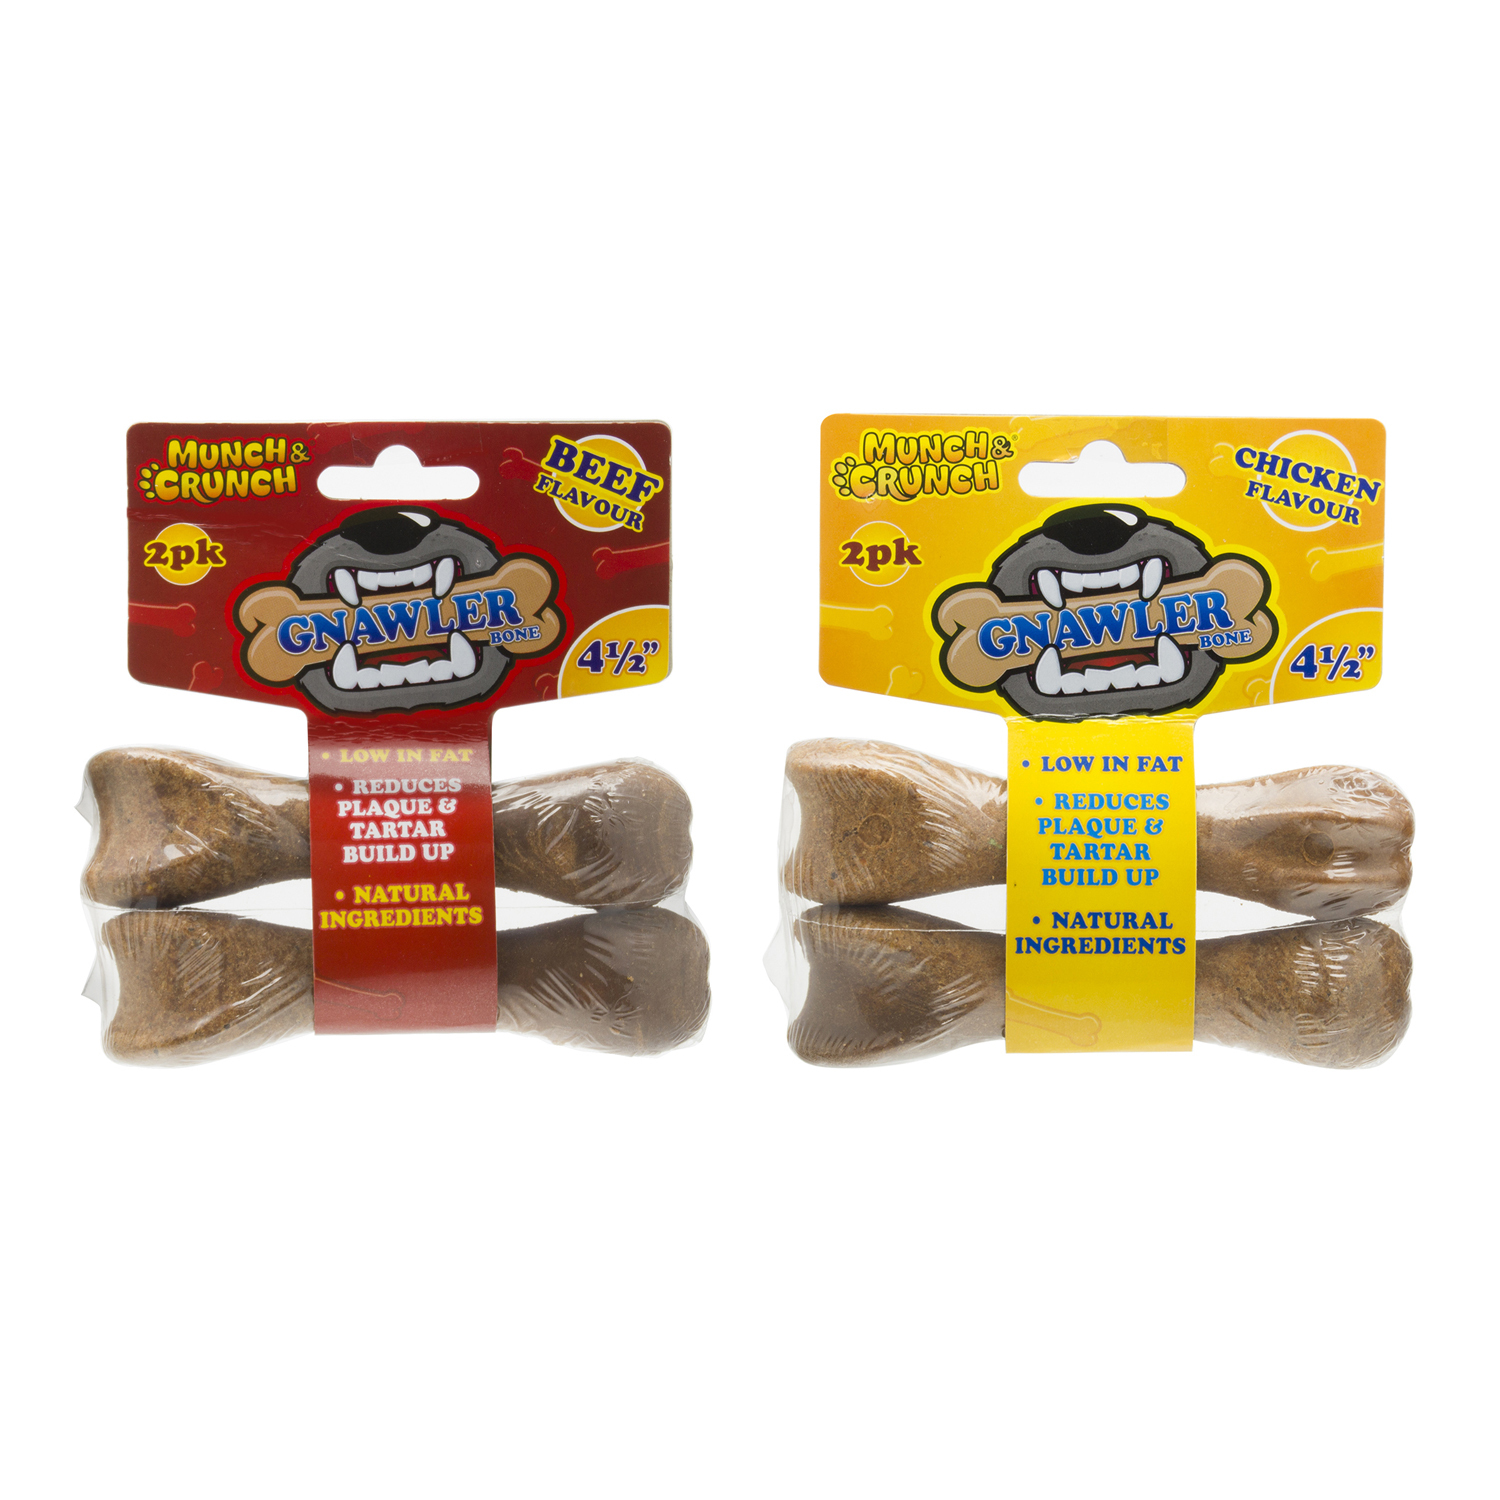 Single Munch & Crunch Gnawler Bone Dog Treats 2 Pack in Assorted styles Image